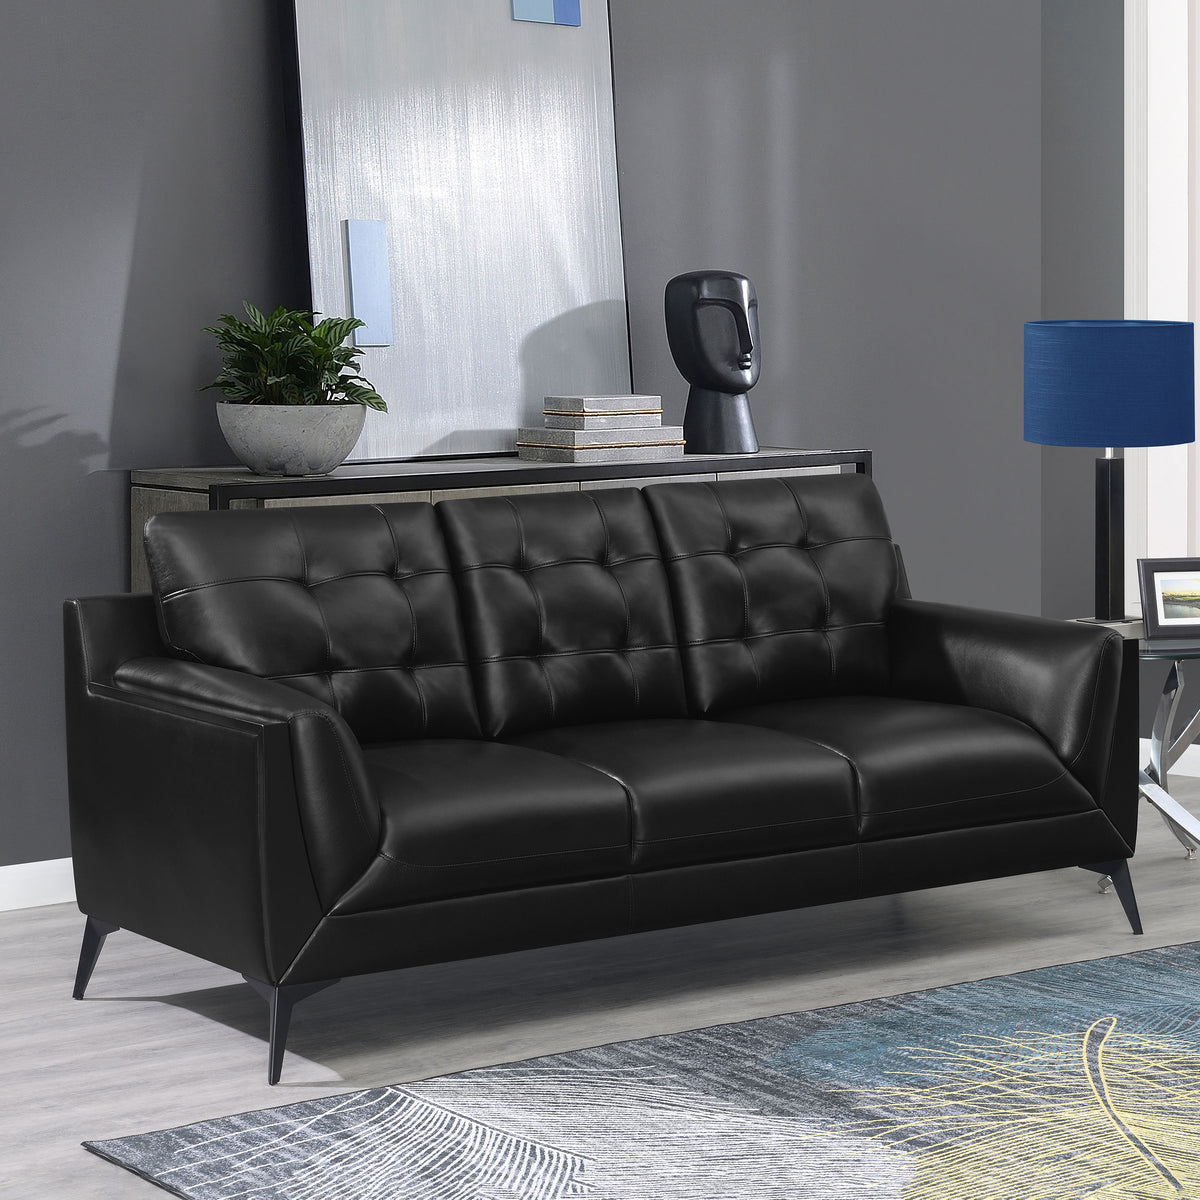 Moira Upholstered Tufted Sofa with Track Arms Black Moira Upholstered Tufted Sofa with Track Arms Black Half Price Furniture